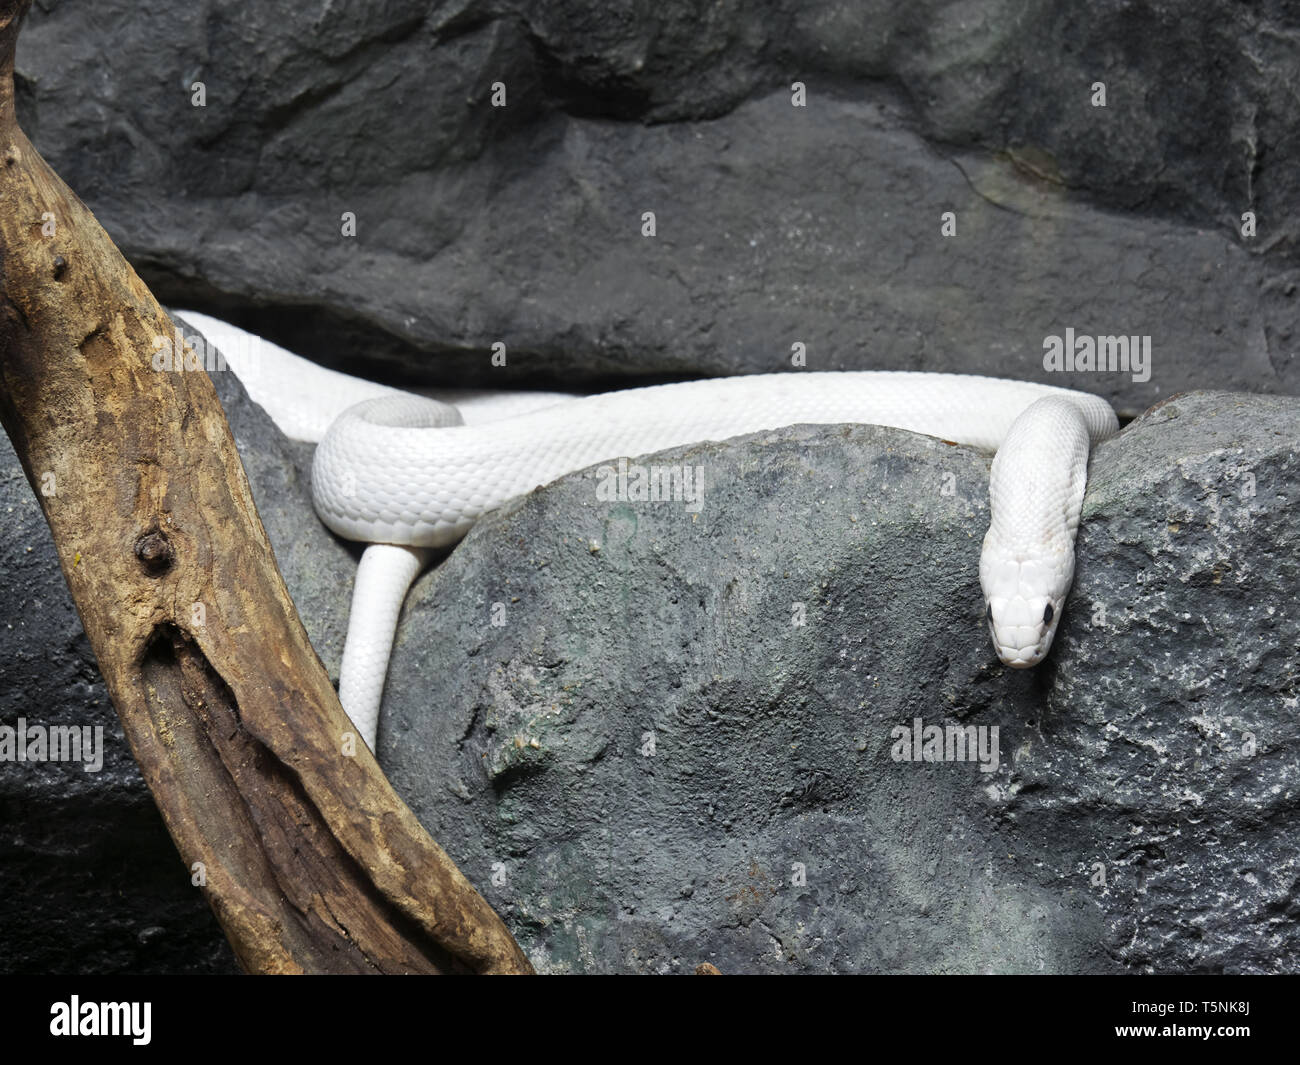 Closeup Albino Black Rat Snake Coiled in The Cave Stock Photo